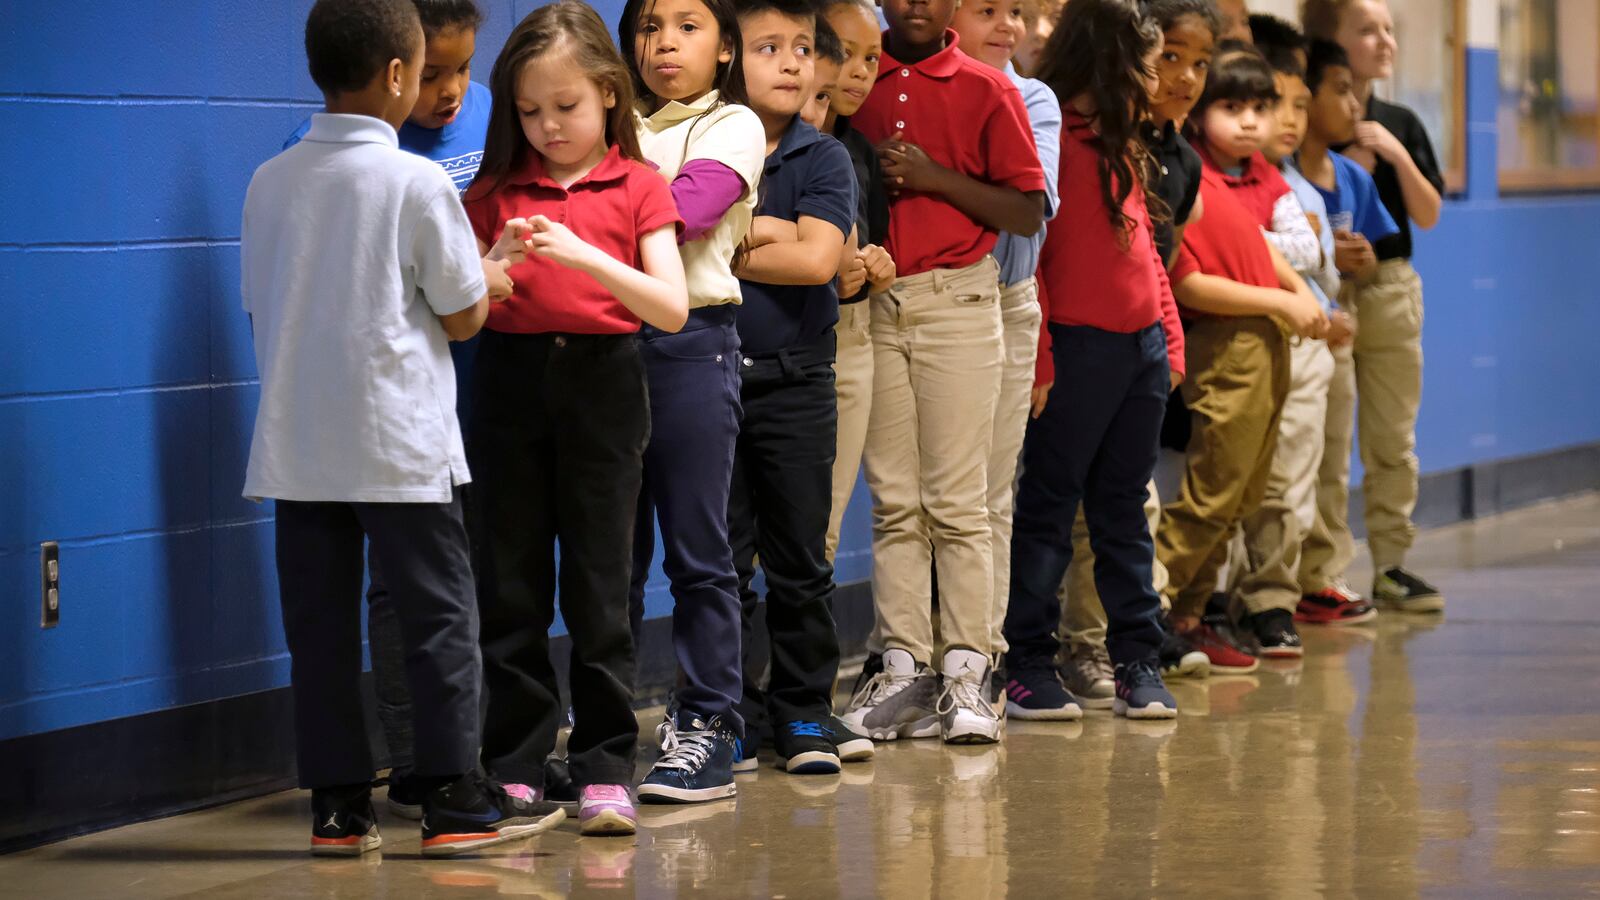 Elementary students in a line in a hallway at Thomas Gregg Neighborhood School, an elementary school in Indianapolis, Indiana. —April, 2019